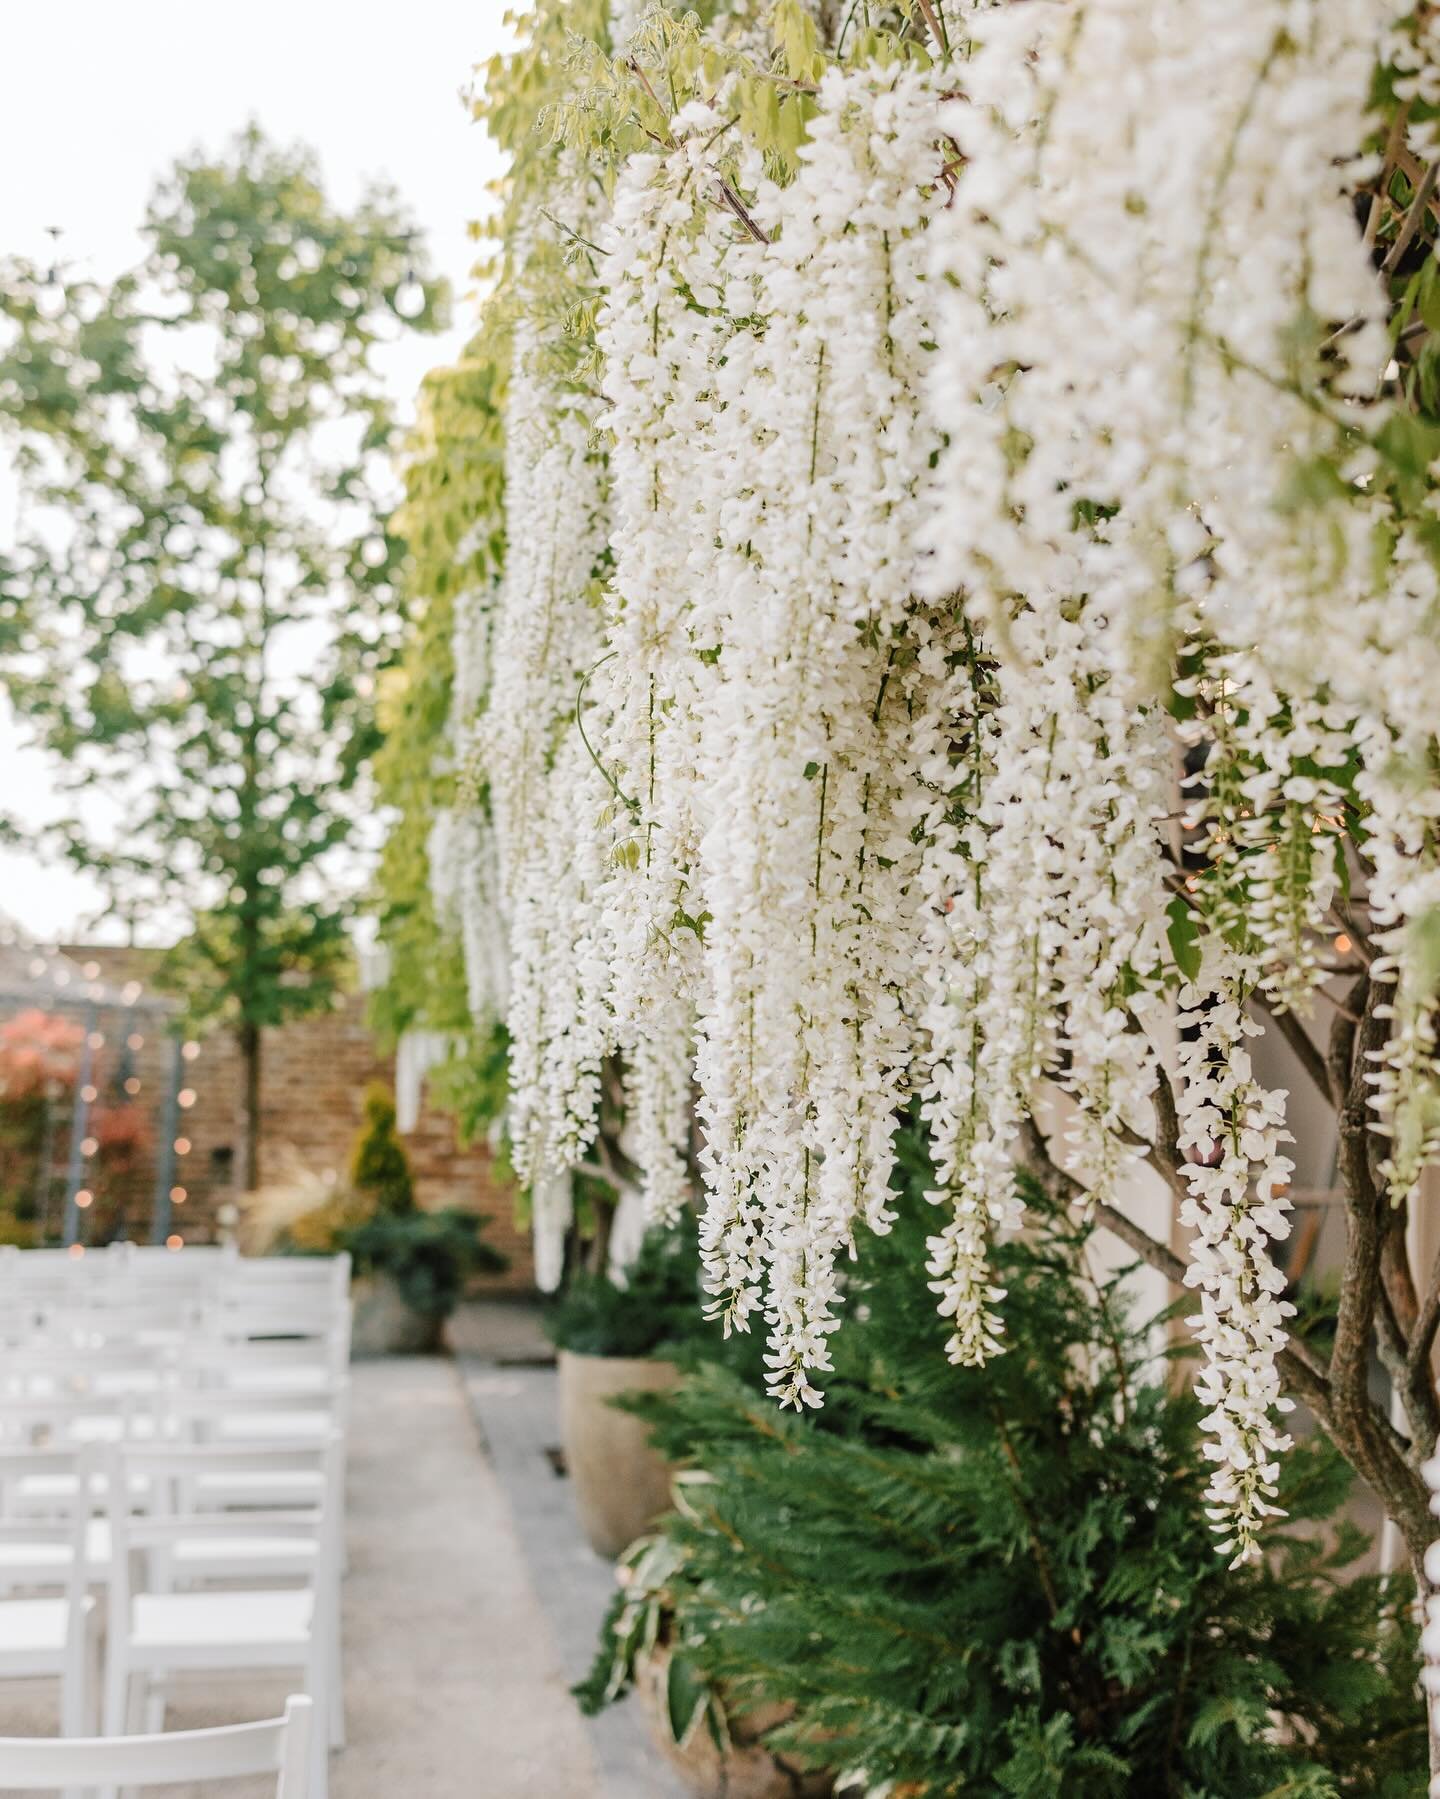 Feeling all the love at Sam + Kevin&rsquo;s magical wedding at @terrain_devonyard! 💐🌿 Look at these details!! @kelabevents and @trystfloral did an amazing job! The stunning florals created an enchanting atmosphere, and the wisteria bloomed just in 